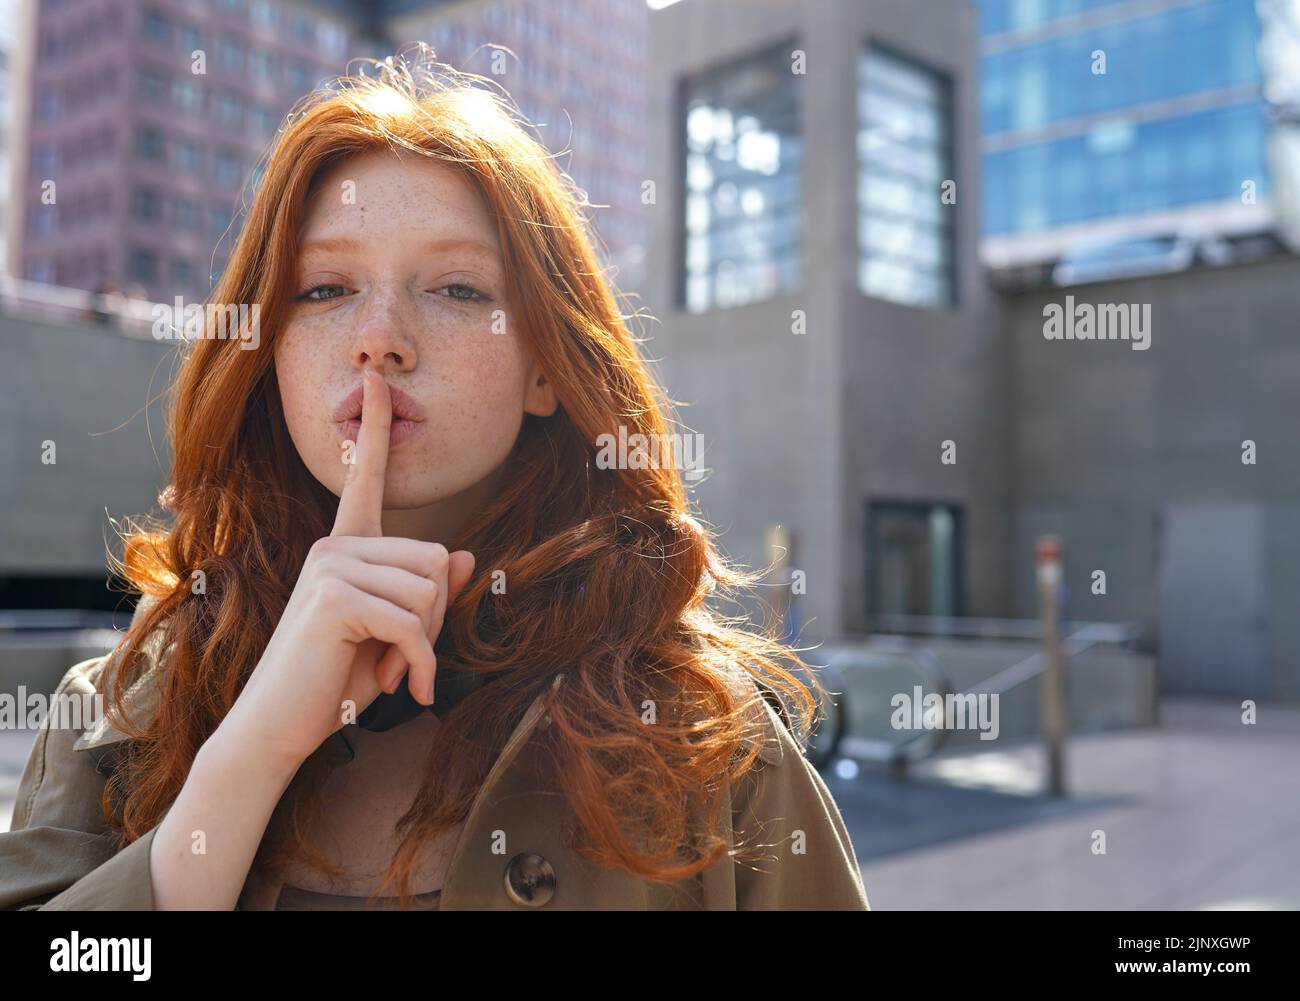 Hipster teen cool redhead fashion girl showing shh sign in city. Stock Photo